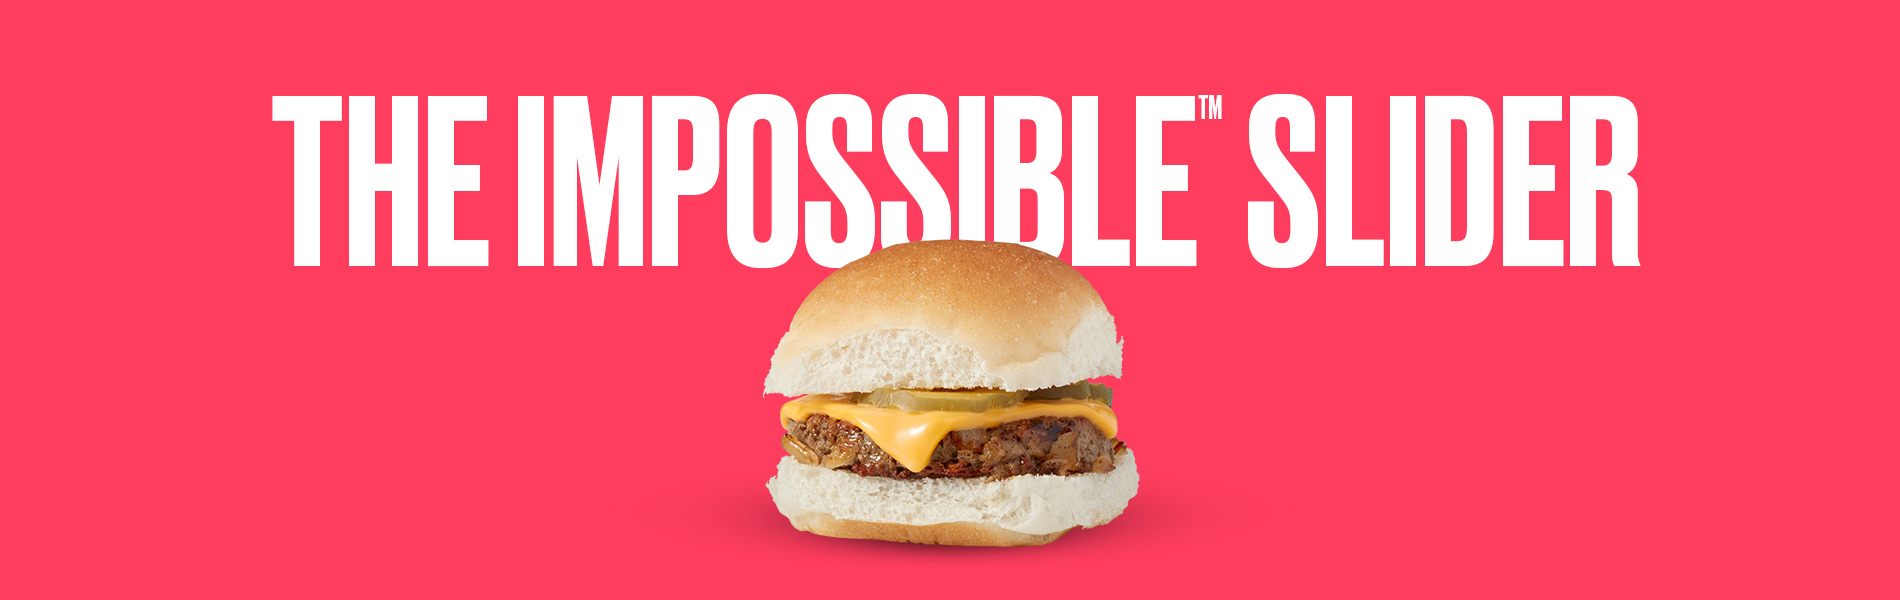 The impossible slider